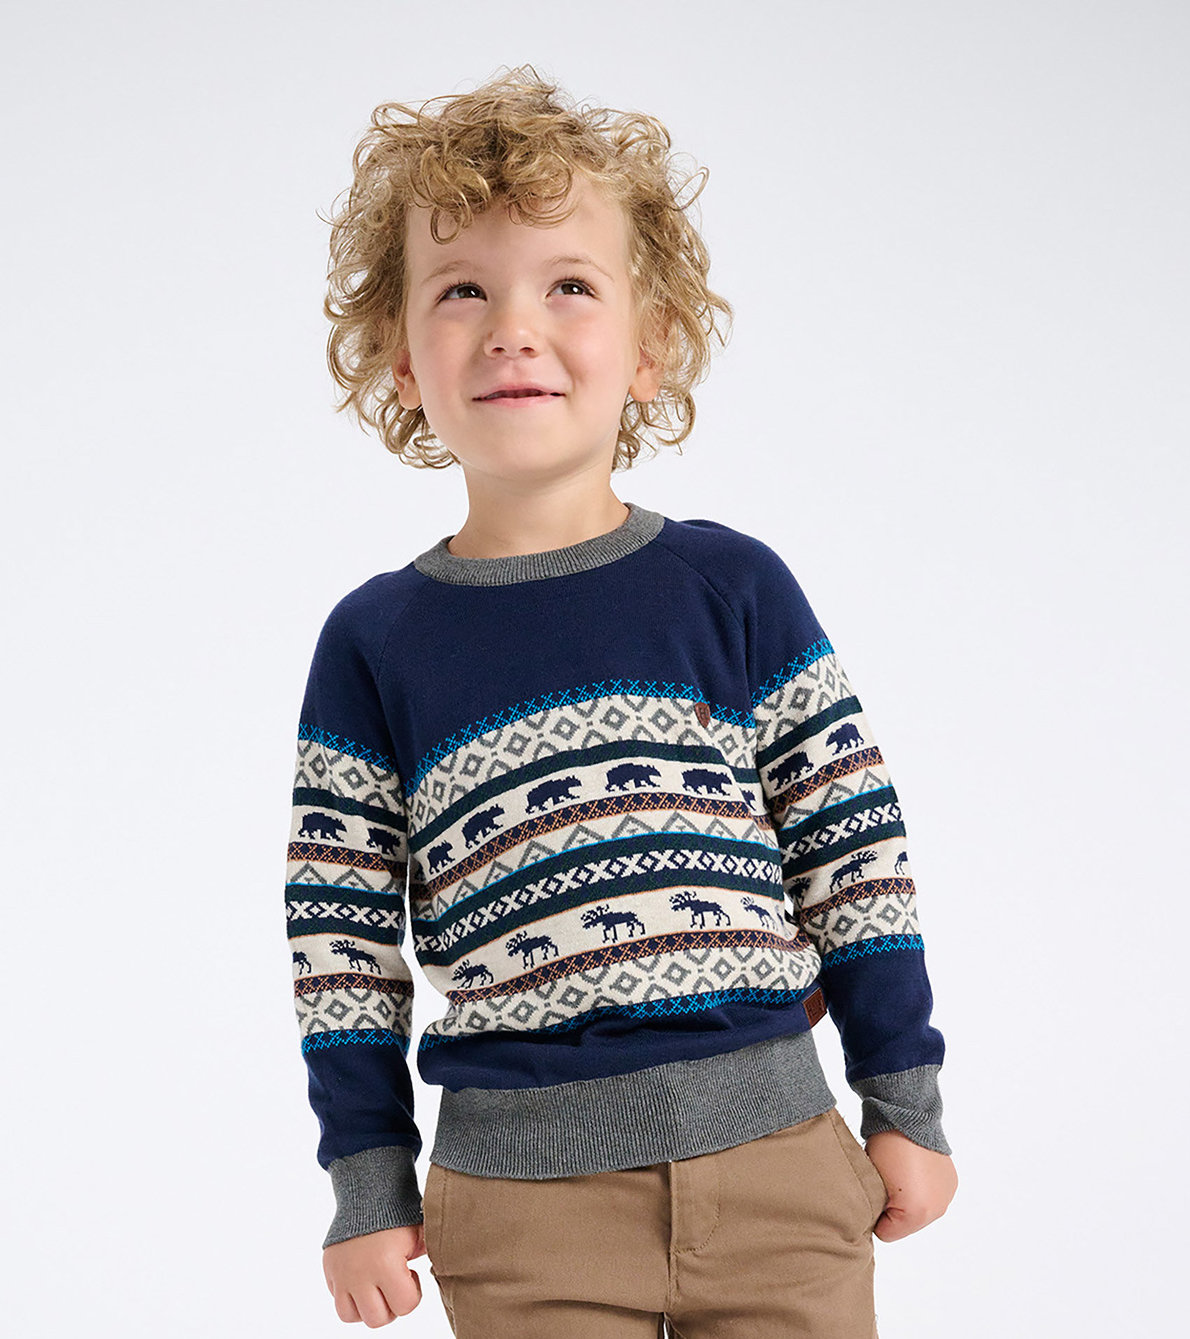 View larger image of Boys Winter Knit Crew Neck Sweater